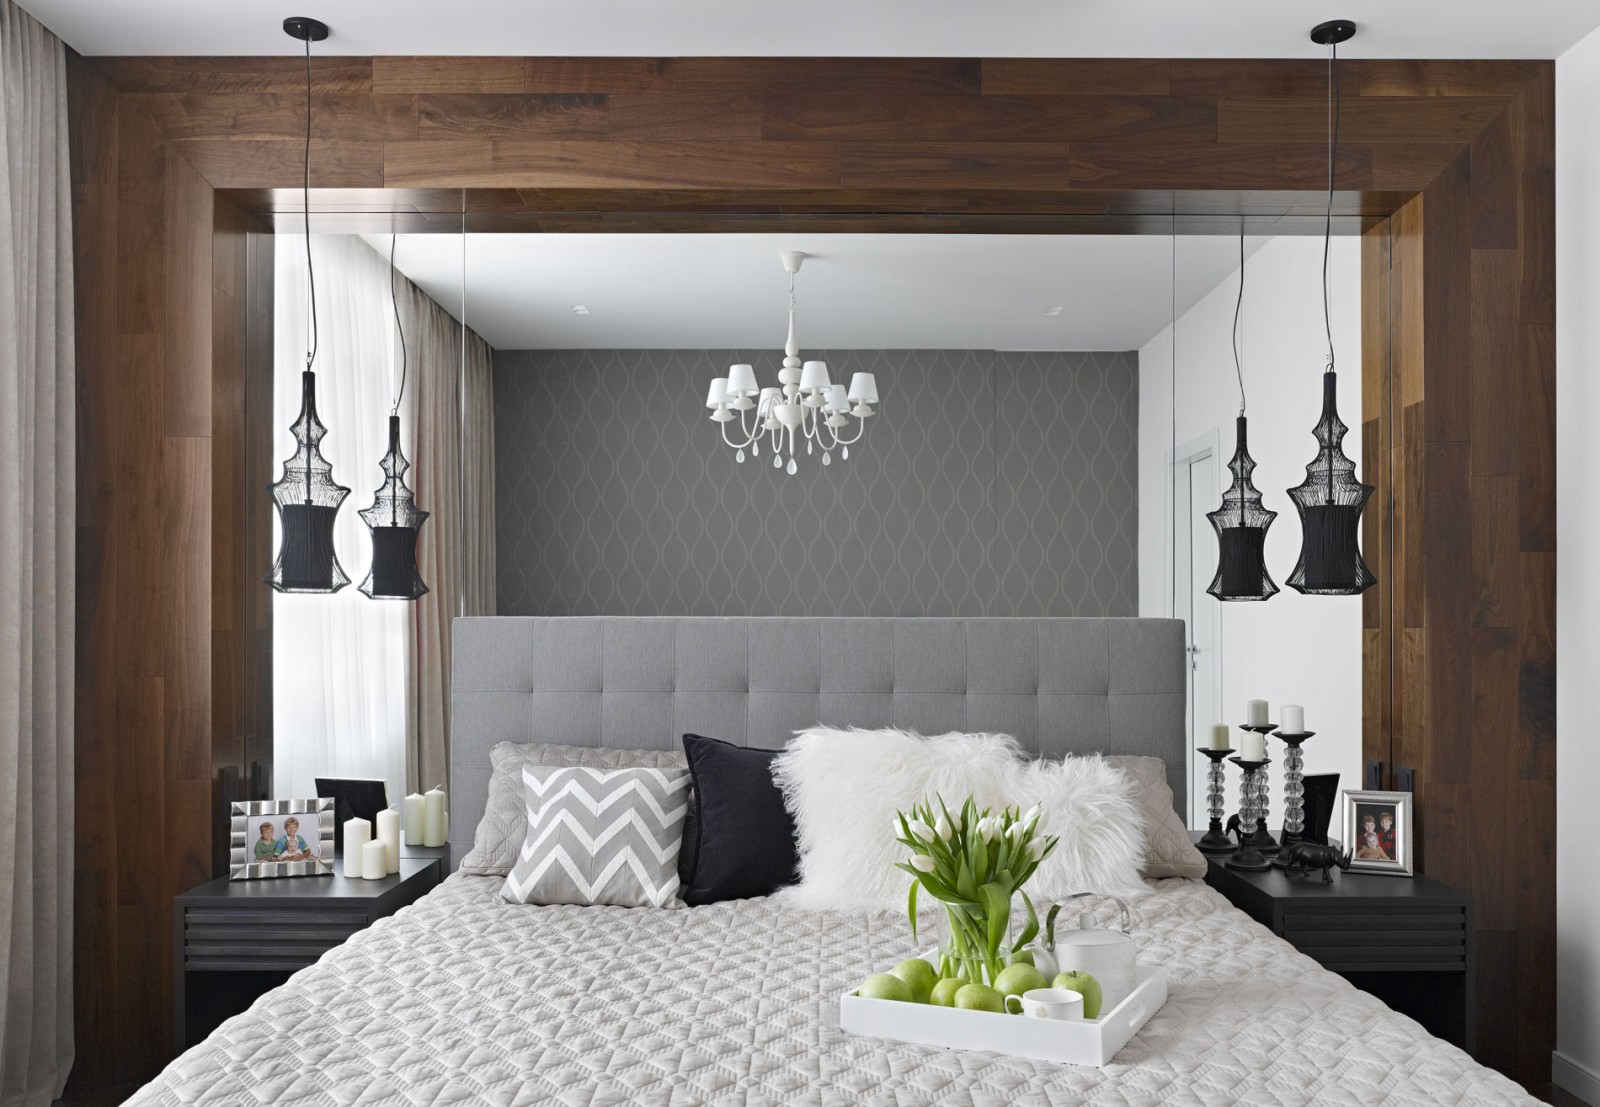 20 Small Bedroom Ideas That Will Leave You Speechless ...